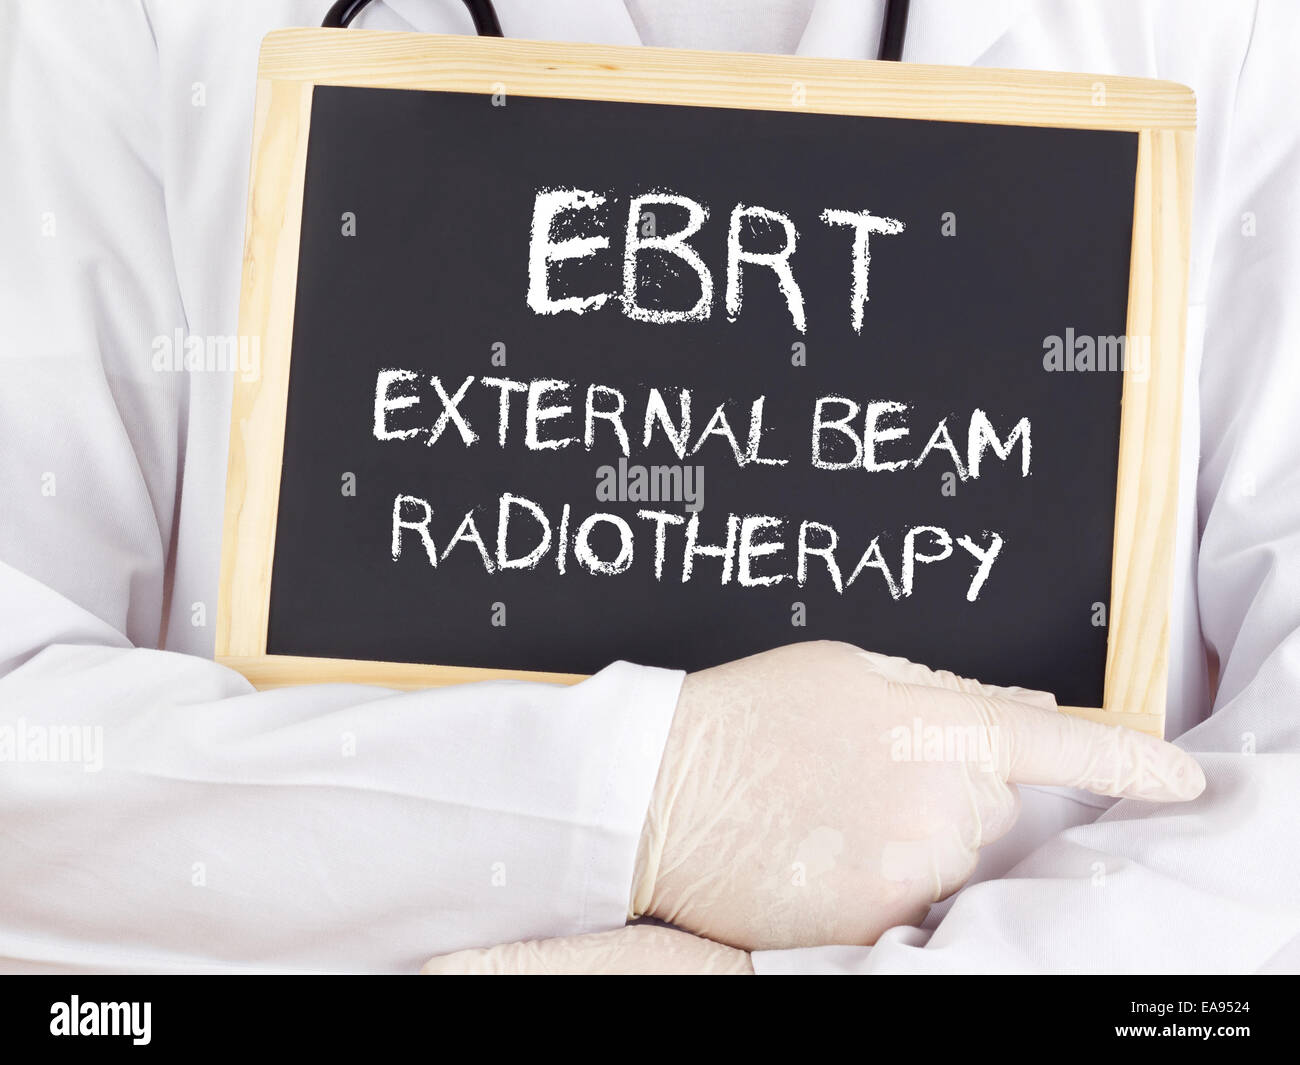 Doctor shows information: EBRT external beam radiotherapy Stock Photo